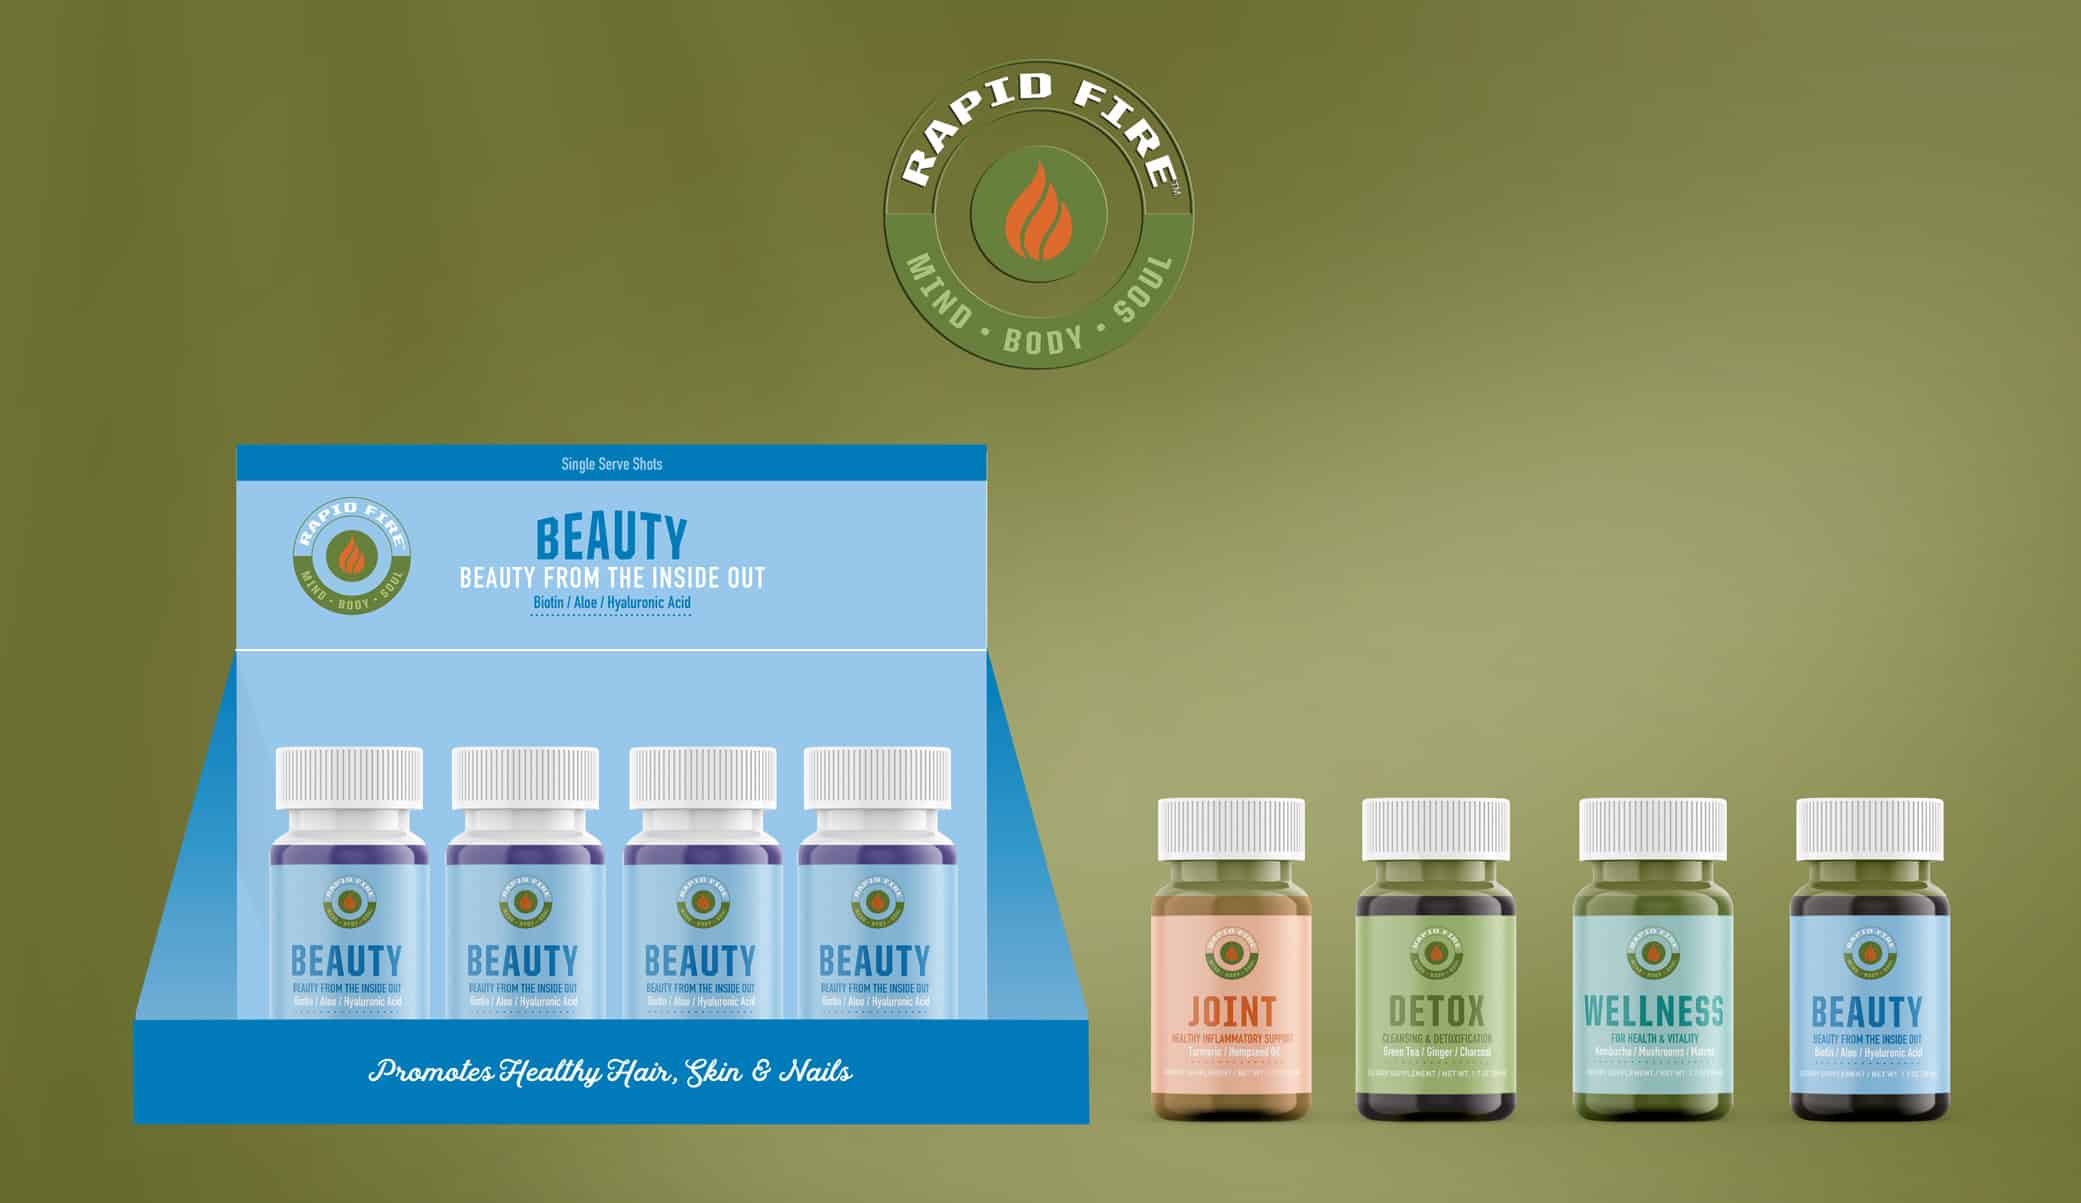 Rapid Fire wellness brand package design single shots in showcase box lined up in a row with earthy pastel color palette.